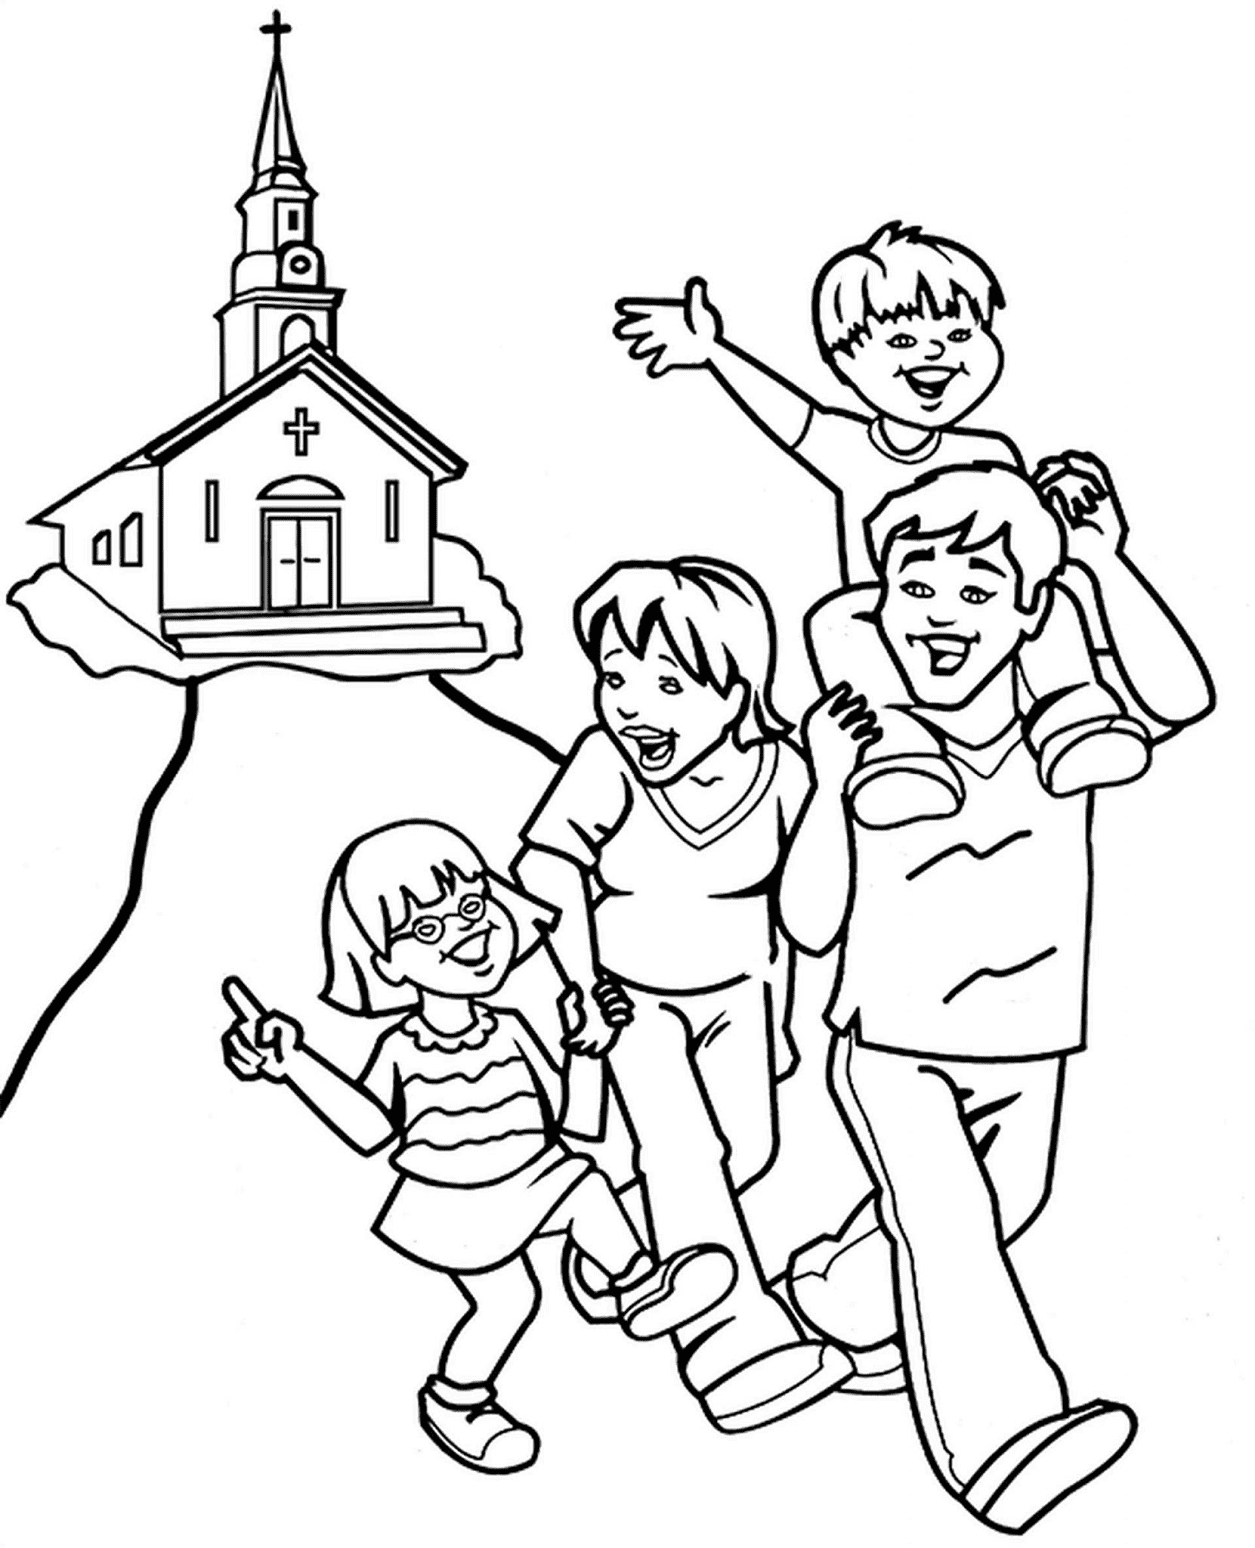 Happy Family Going Home From Church Coloring Pages